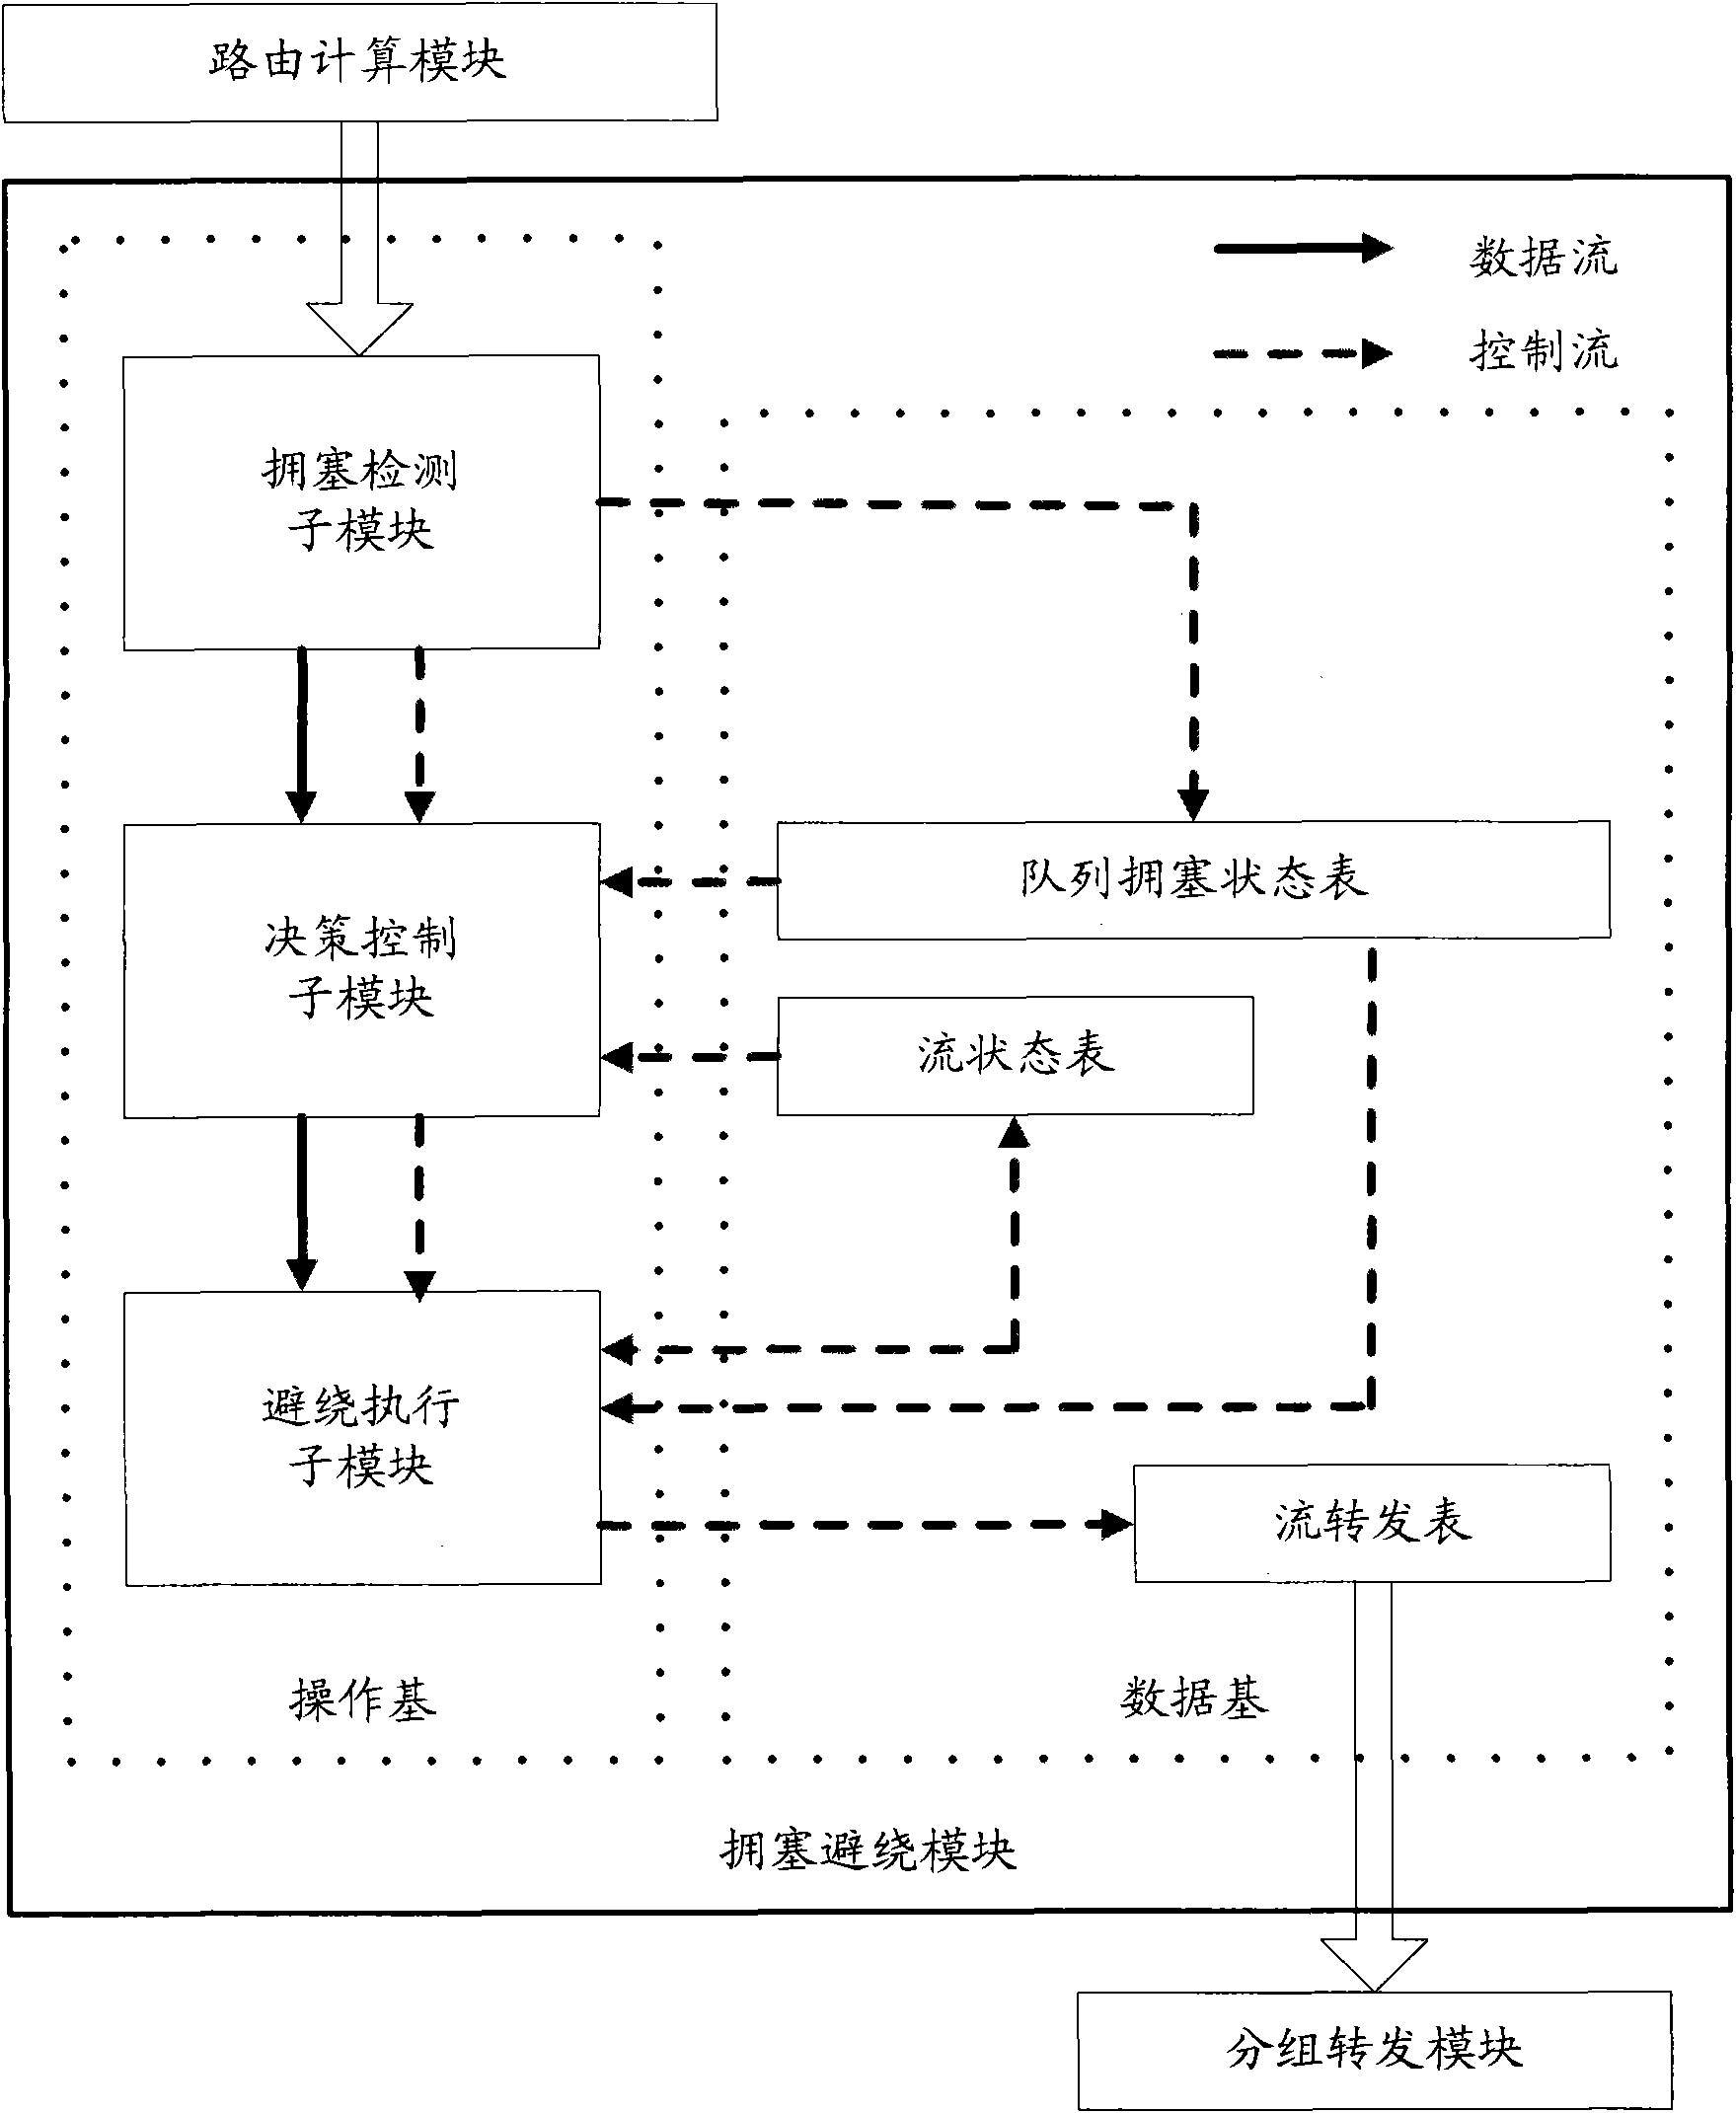 Congestion control method and network nodes